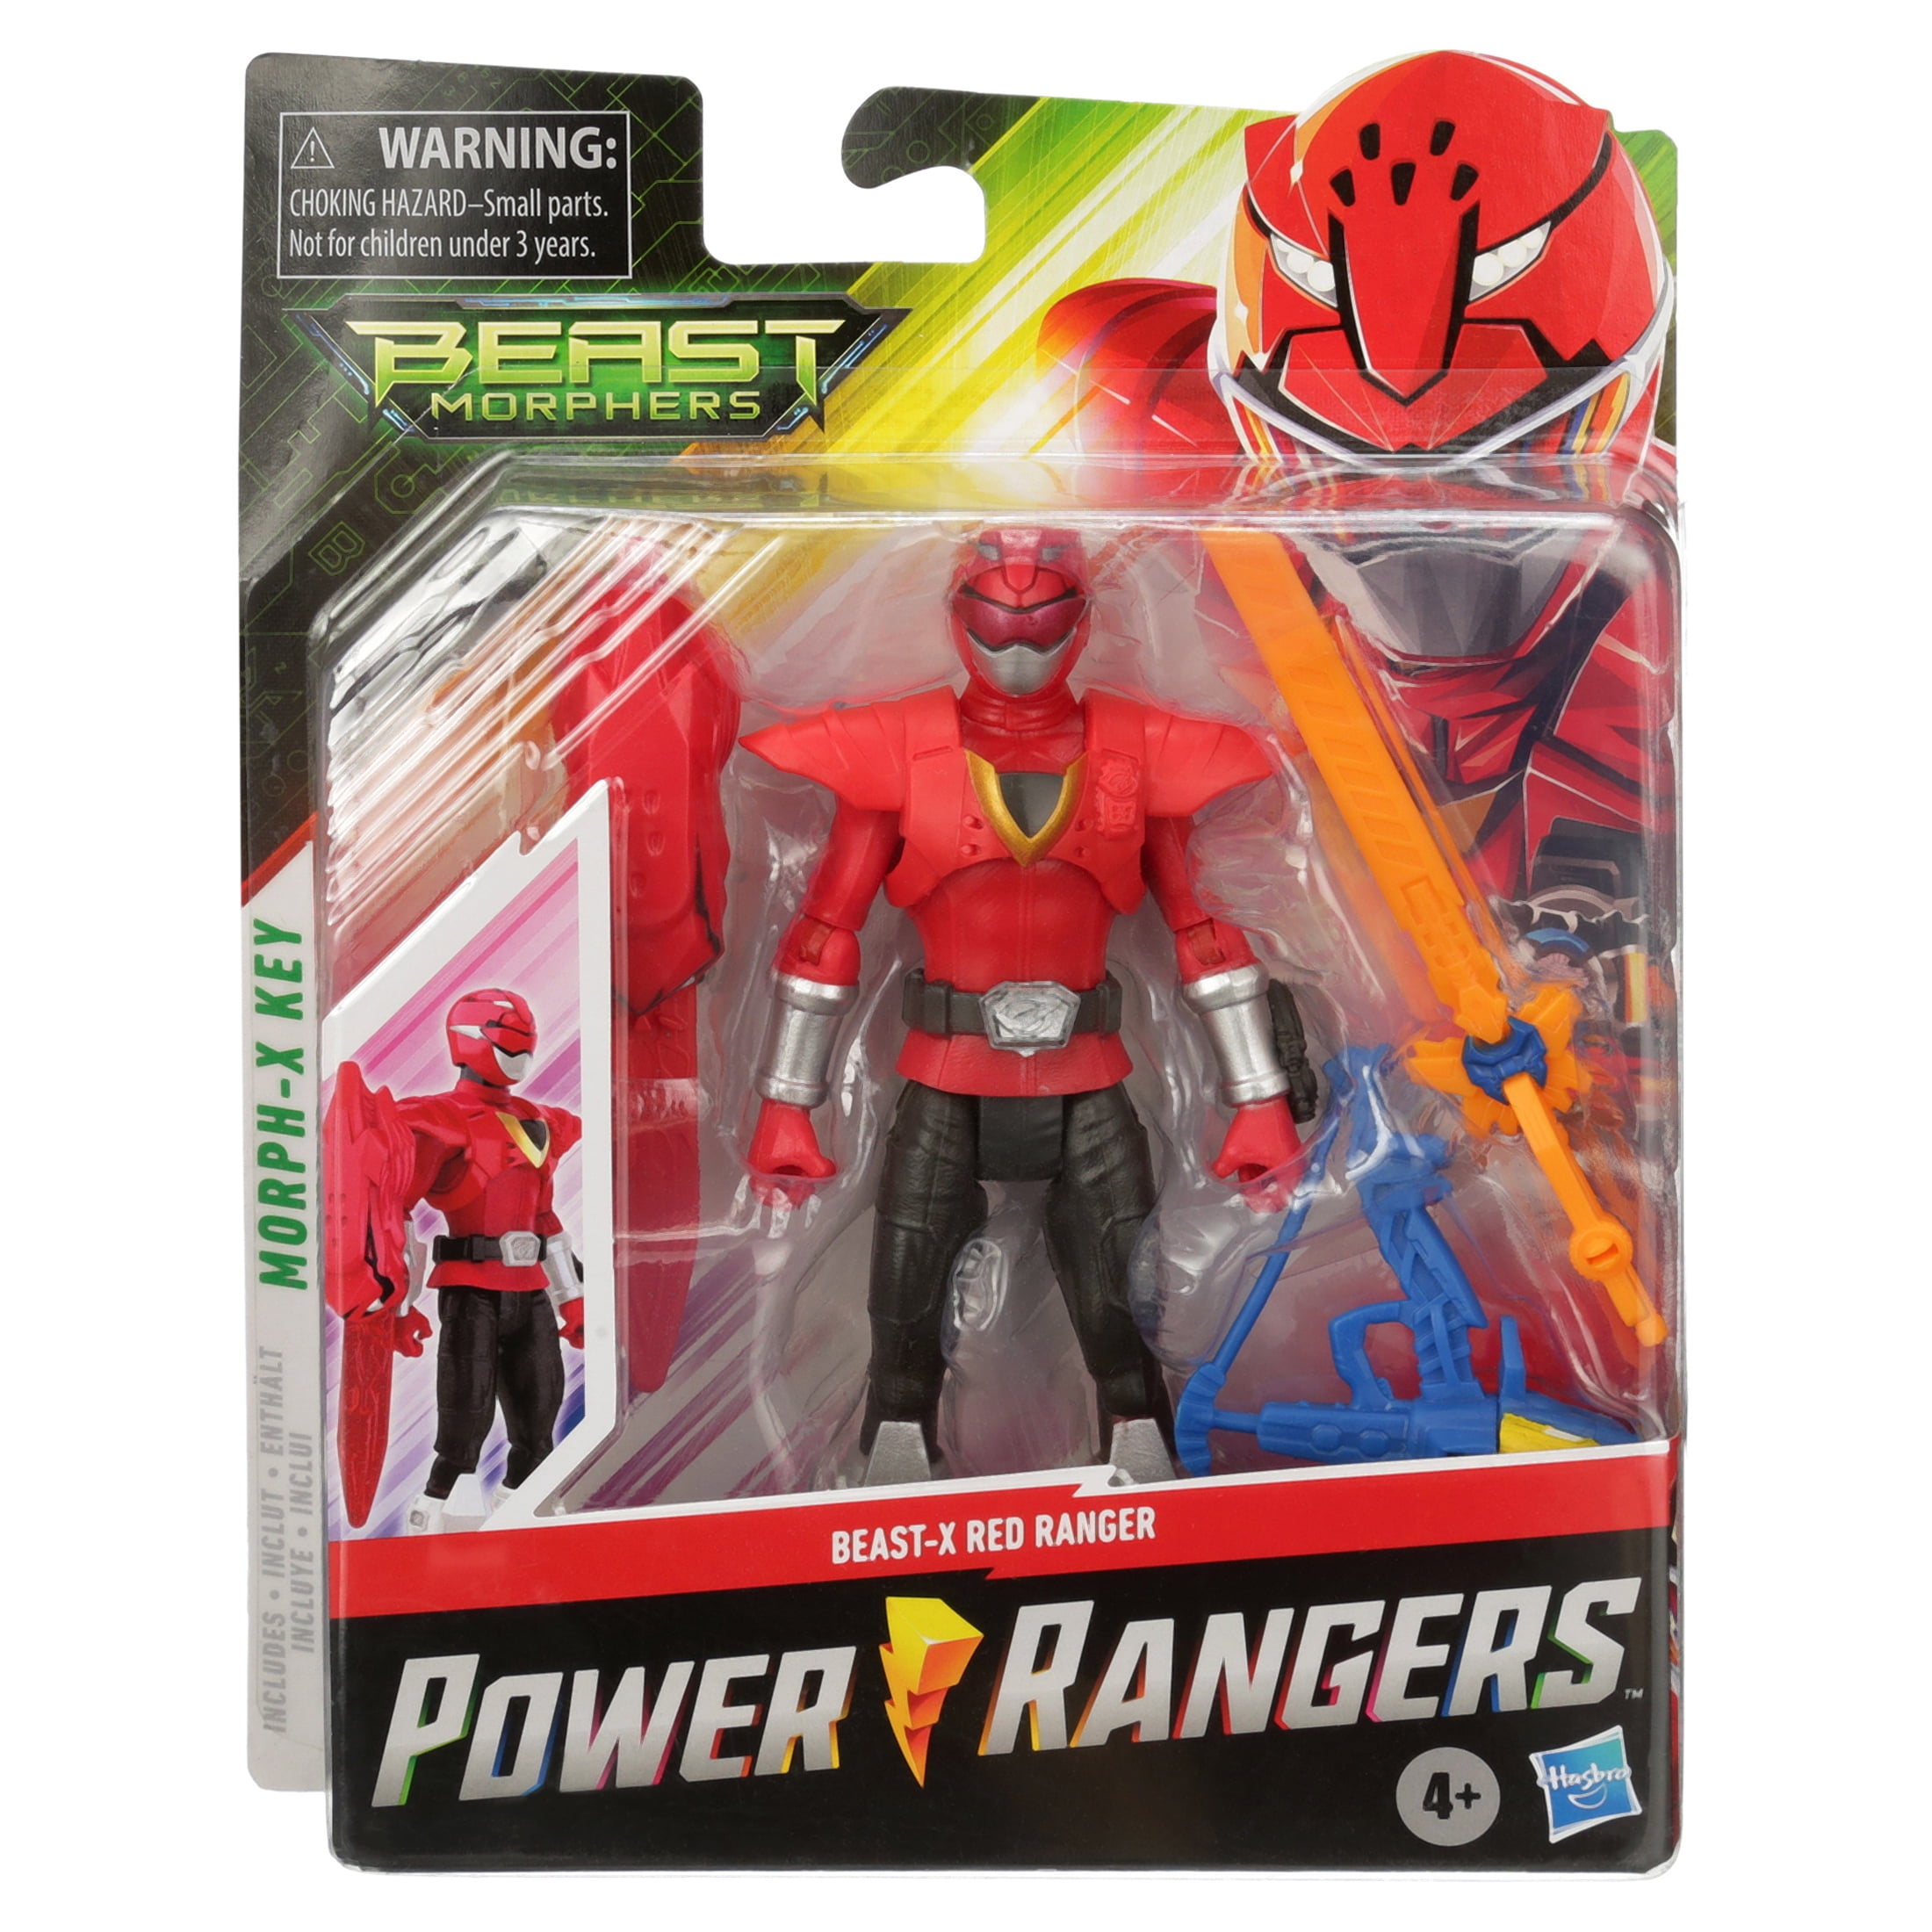 Power Rangers Beast Morphers Beast-X Red Ranger 6 Action Figure Toy Inspired by The TV Show